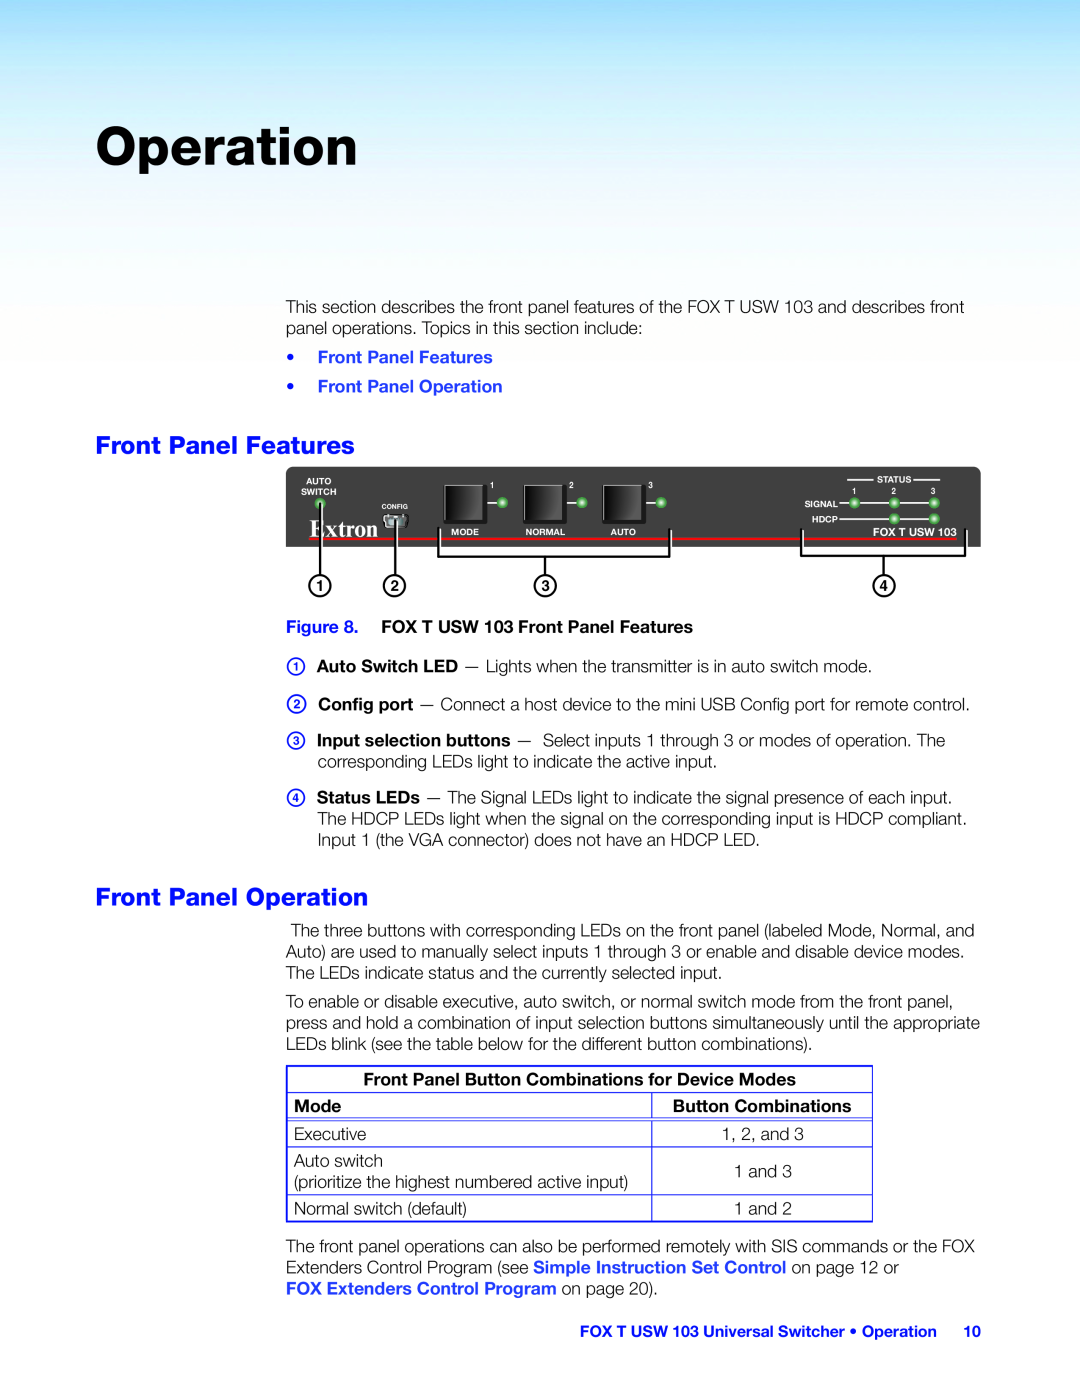 Extron electronic manual Front Panel Operation, FOX T USW 103 Front Panel Features, Mode, Button Combinations 